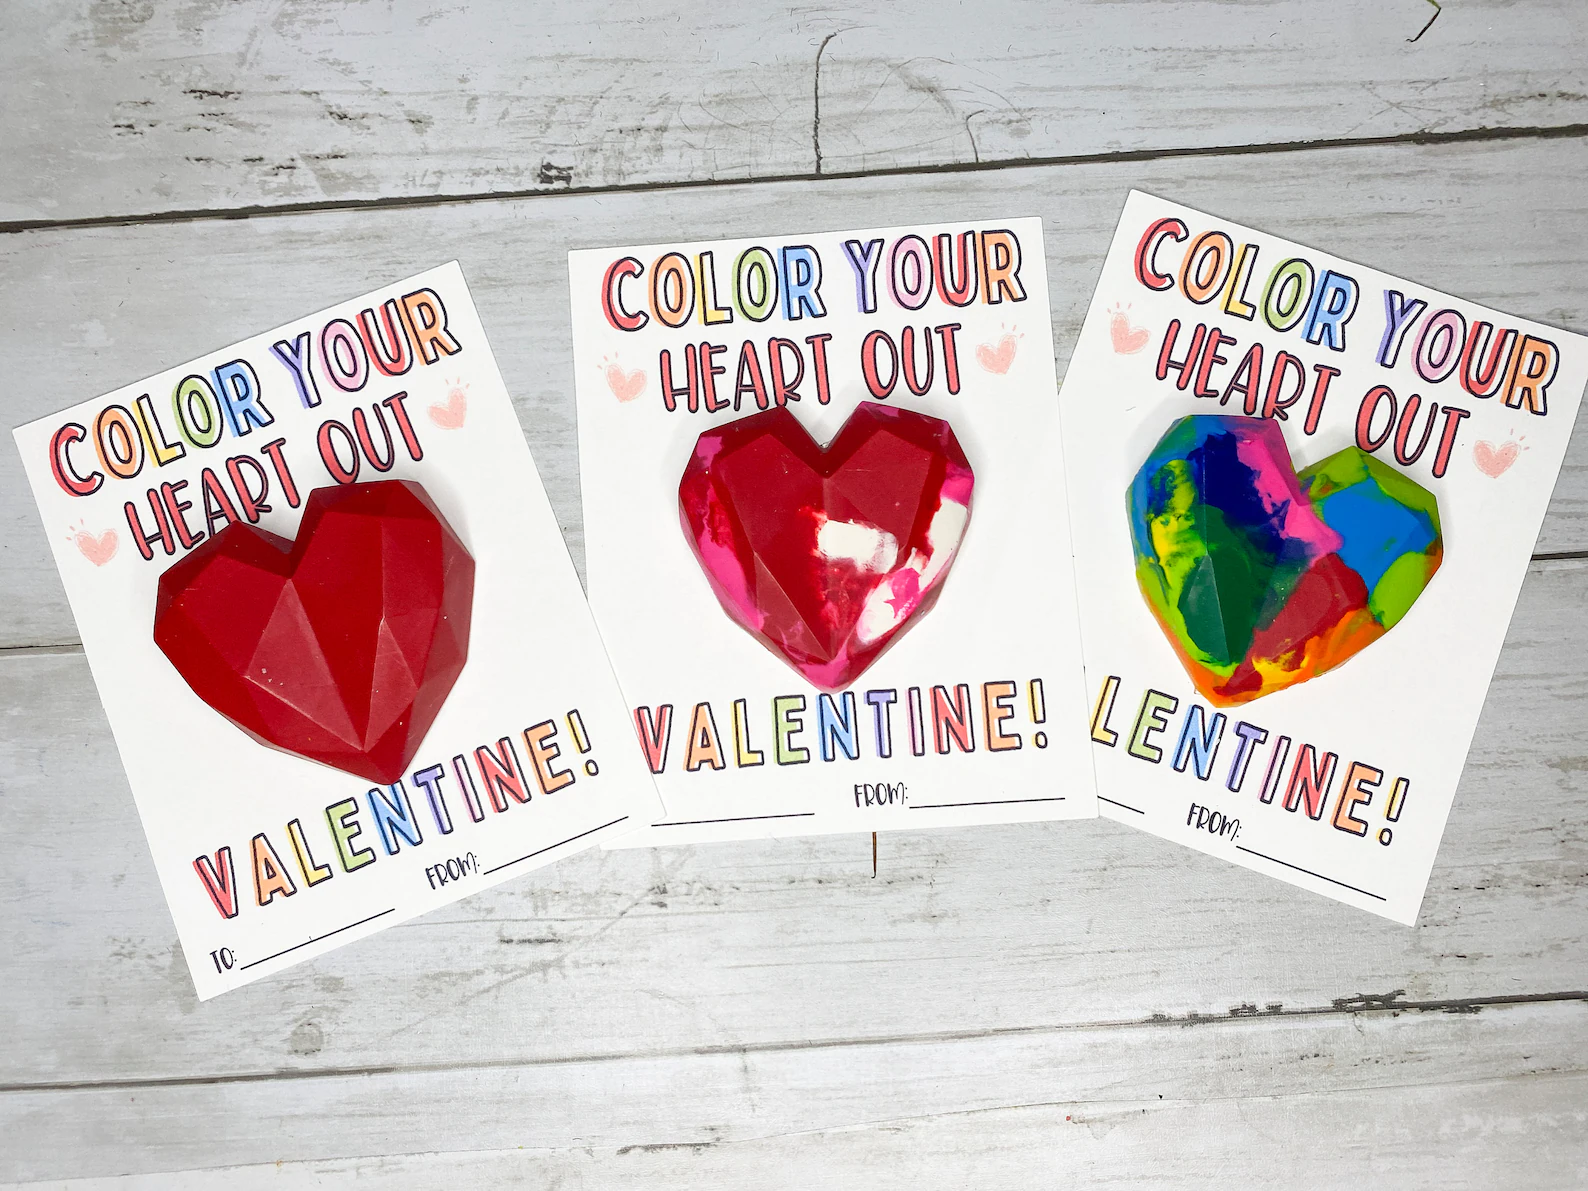 Color your heart out Valentine's Day cards with heart-shaped crayon 